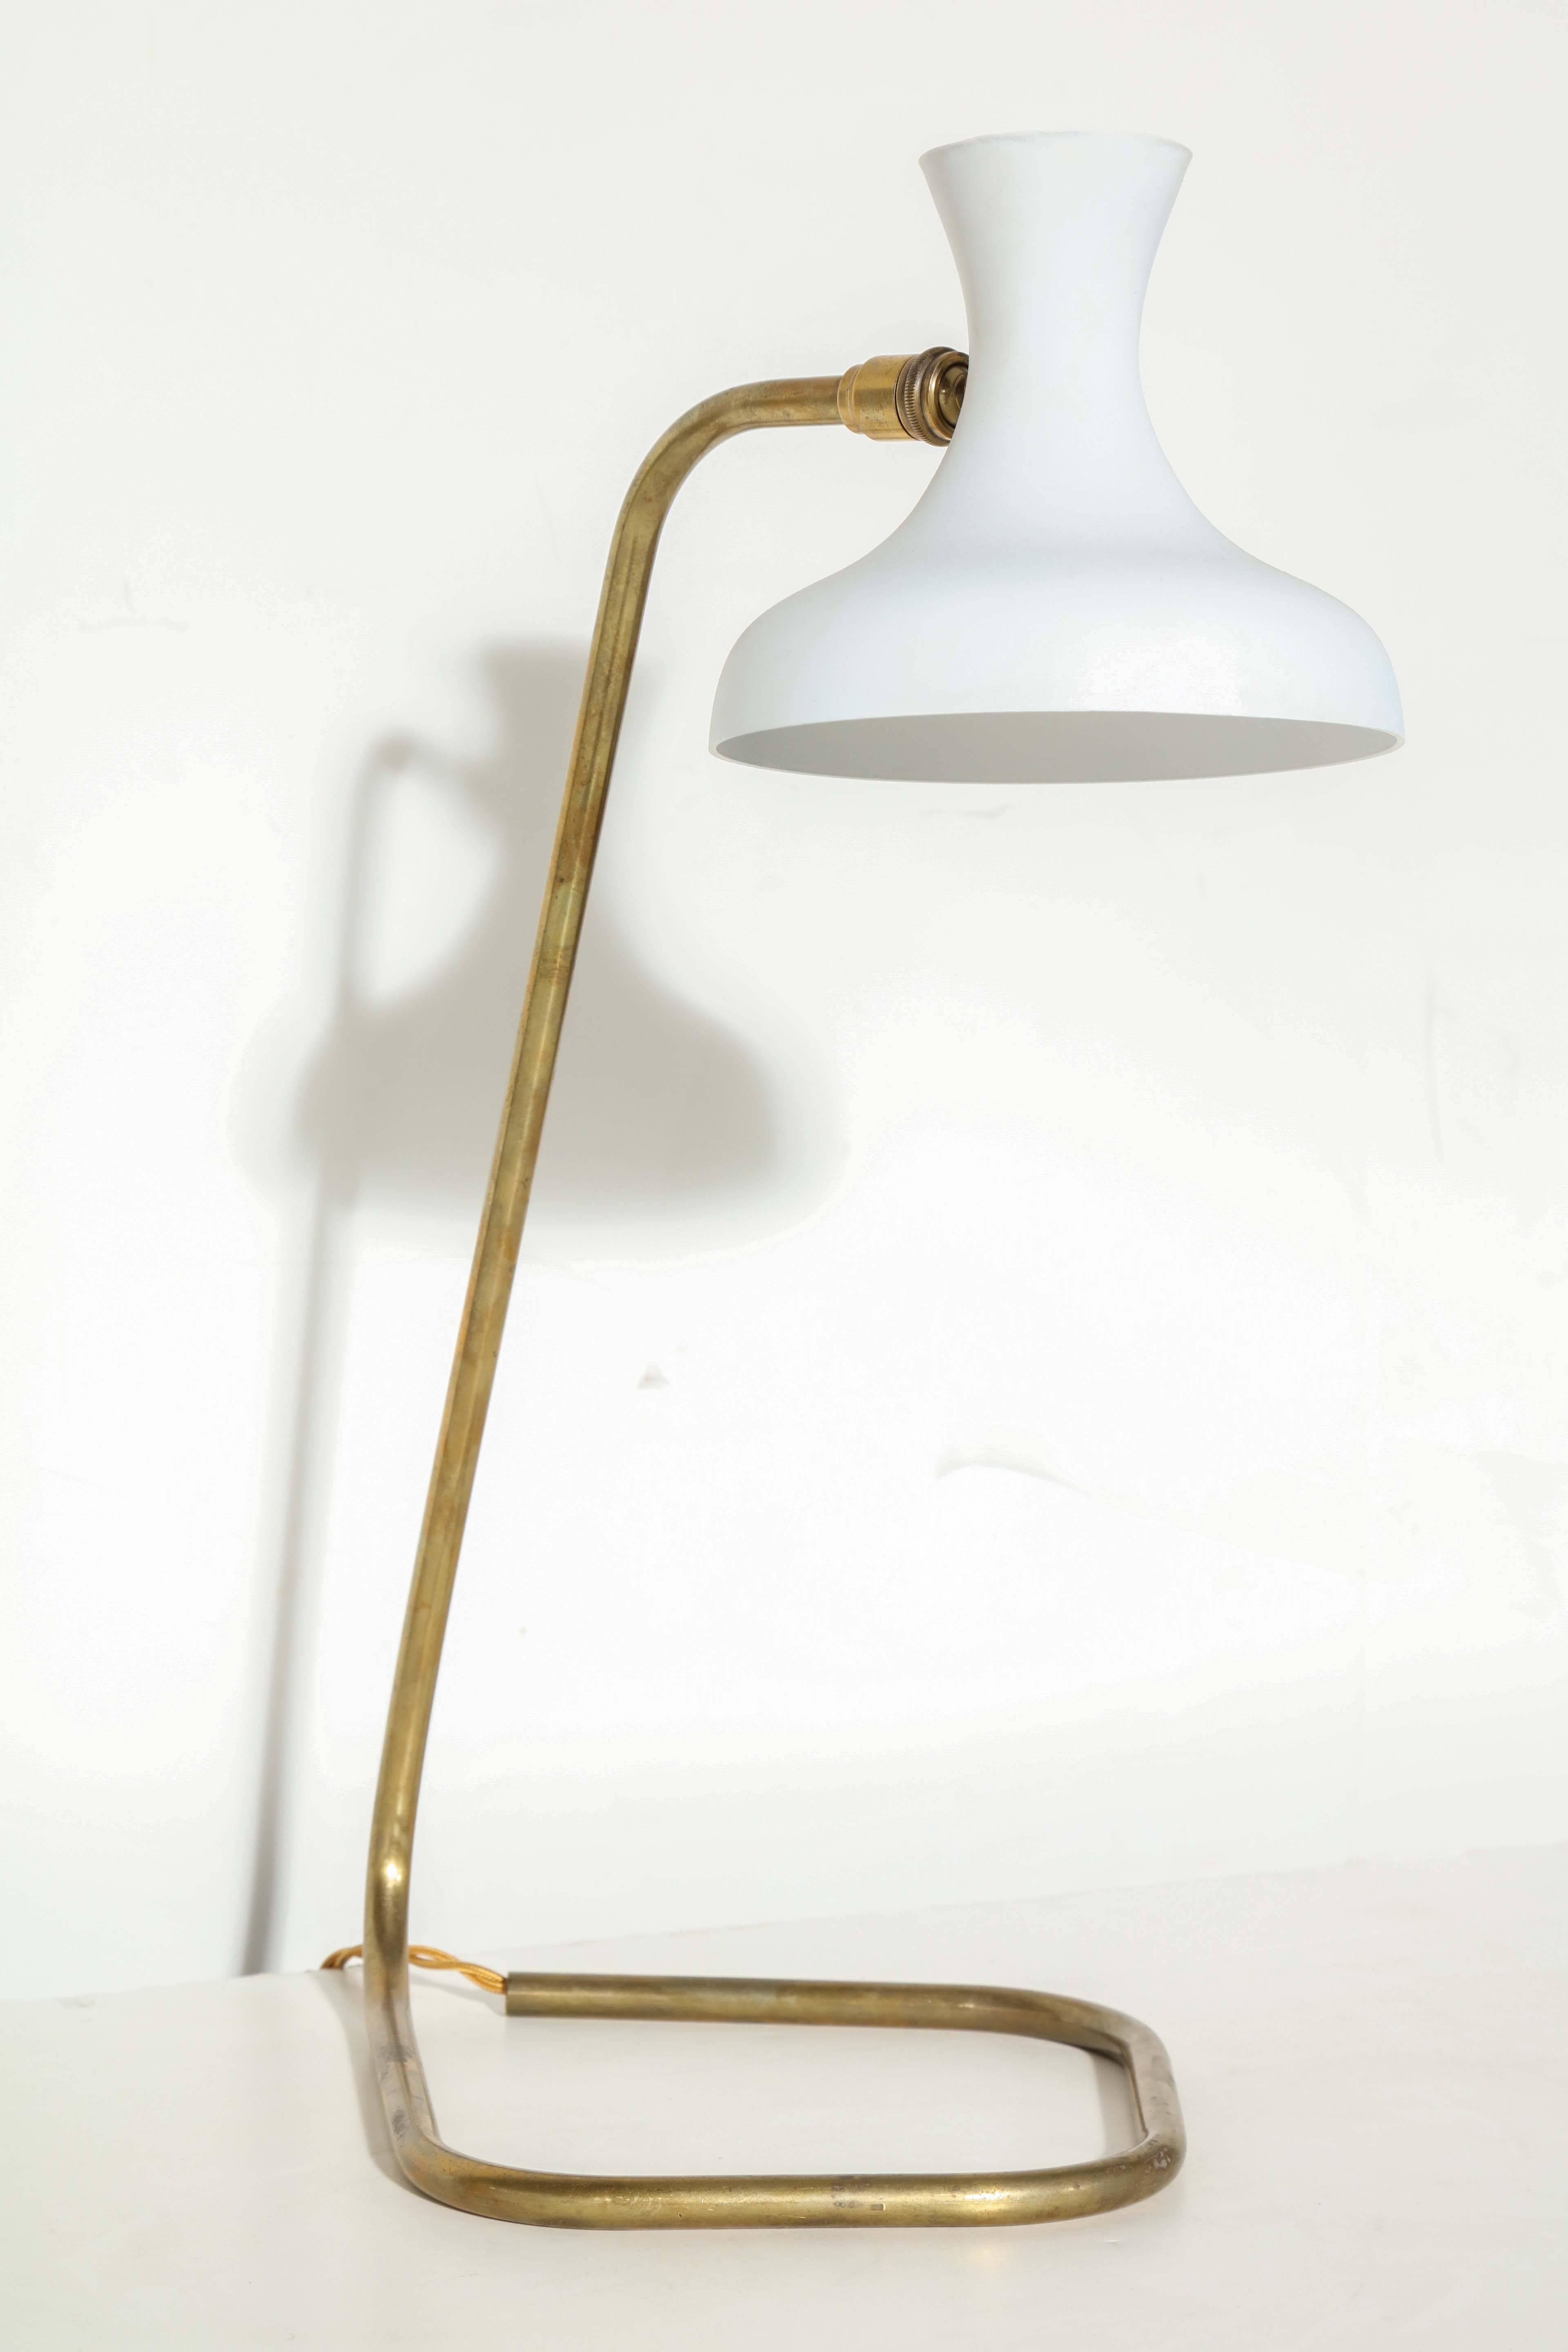 French modern table lamp from the 1950s. Featuring an open tubular patinated brass stem and base with adjustable bell shaped white enameled shade. Measures: 5.5